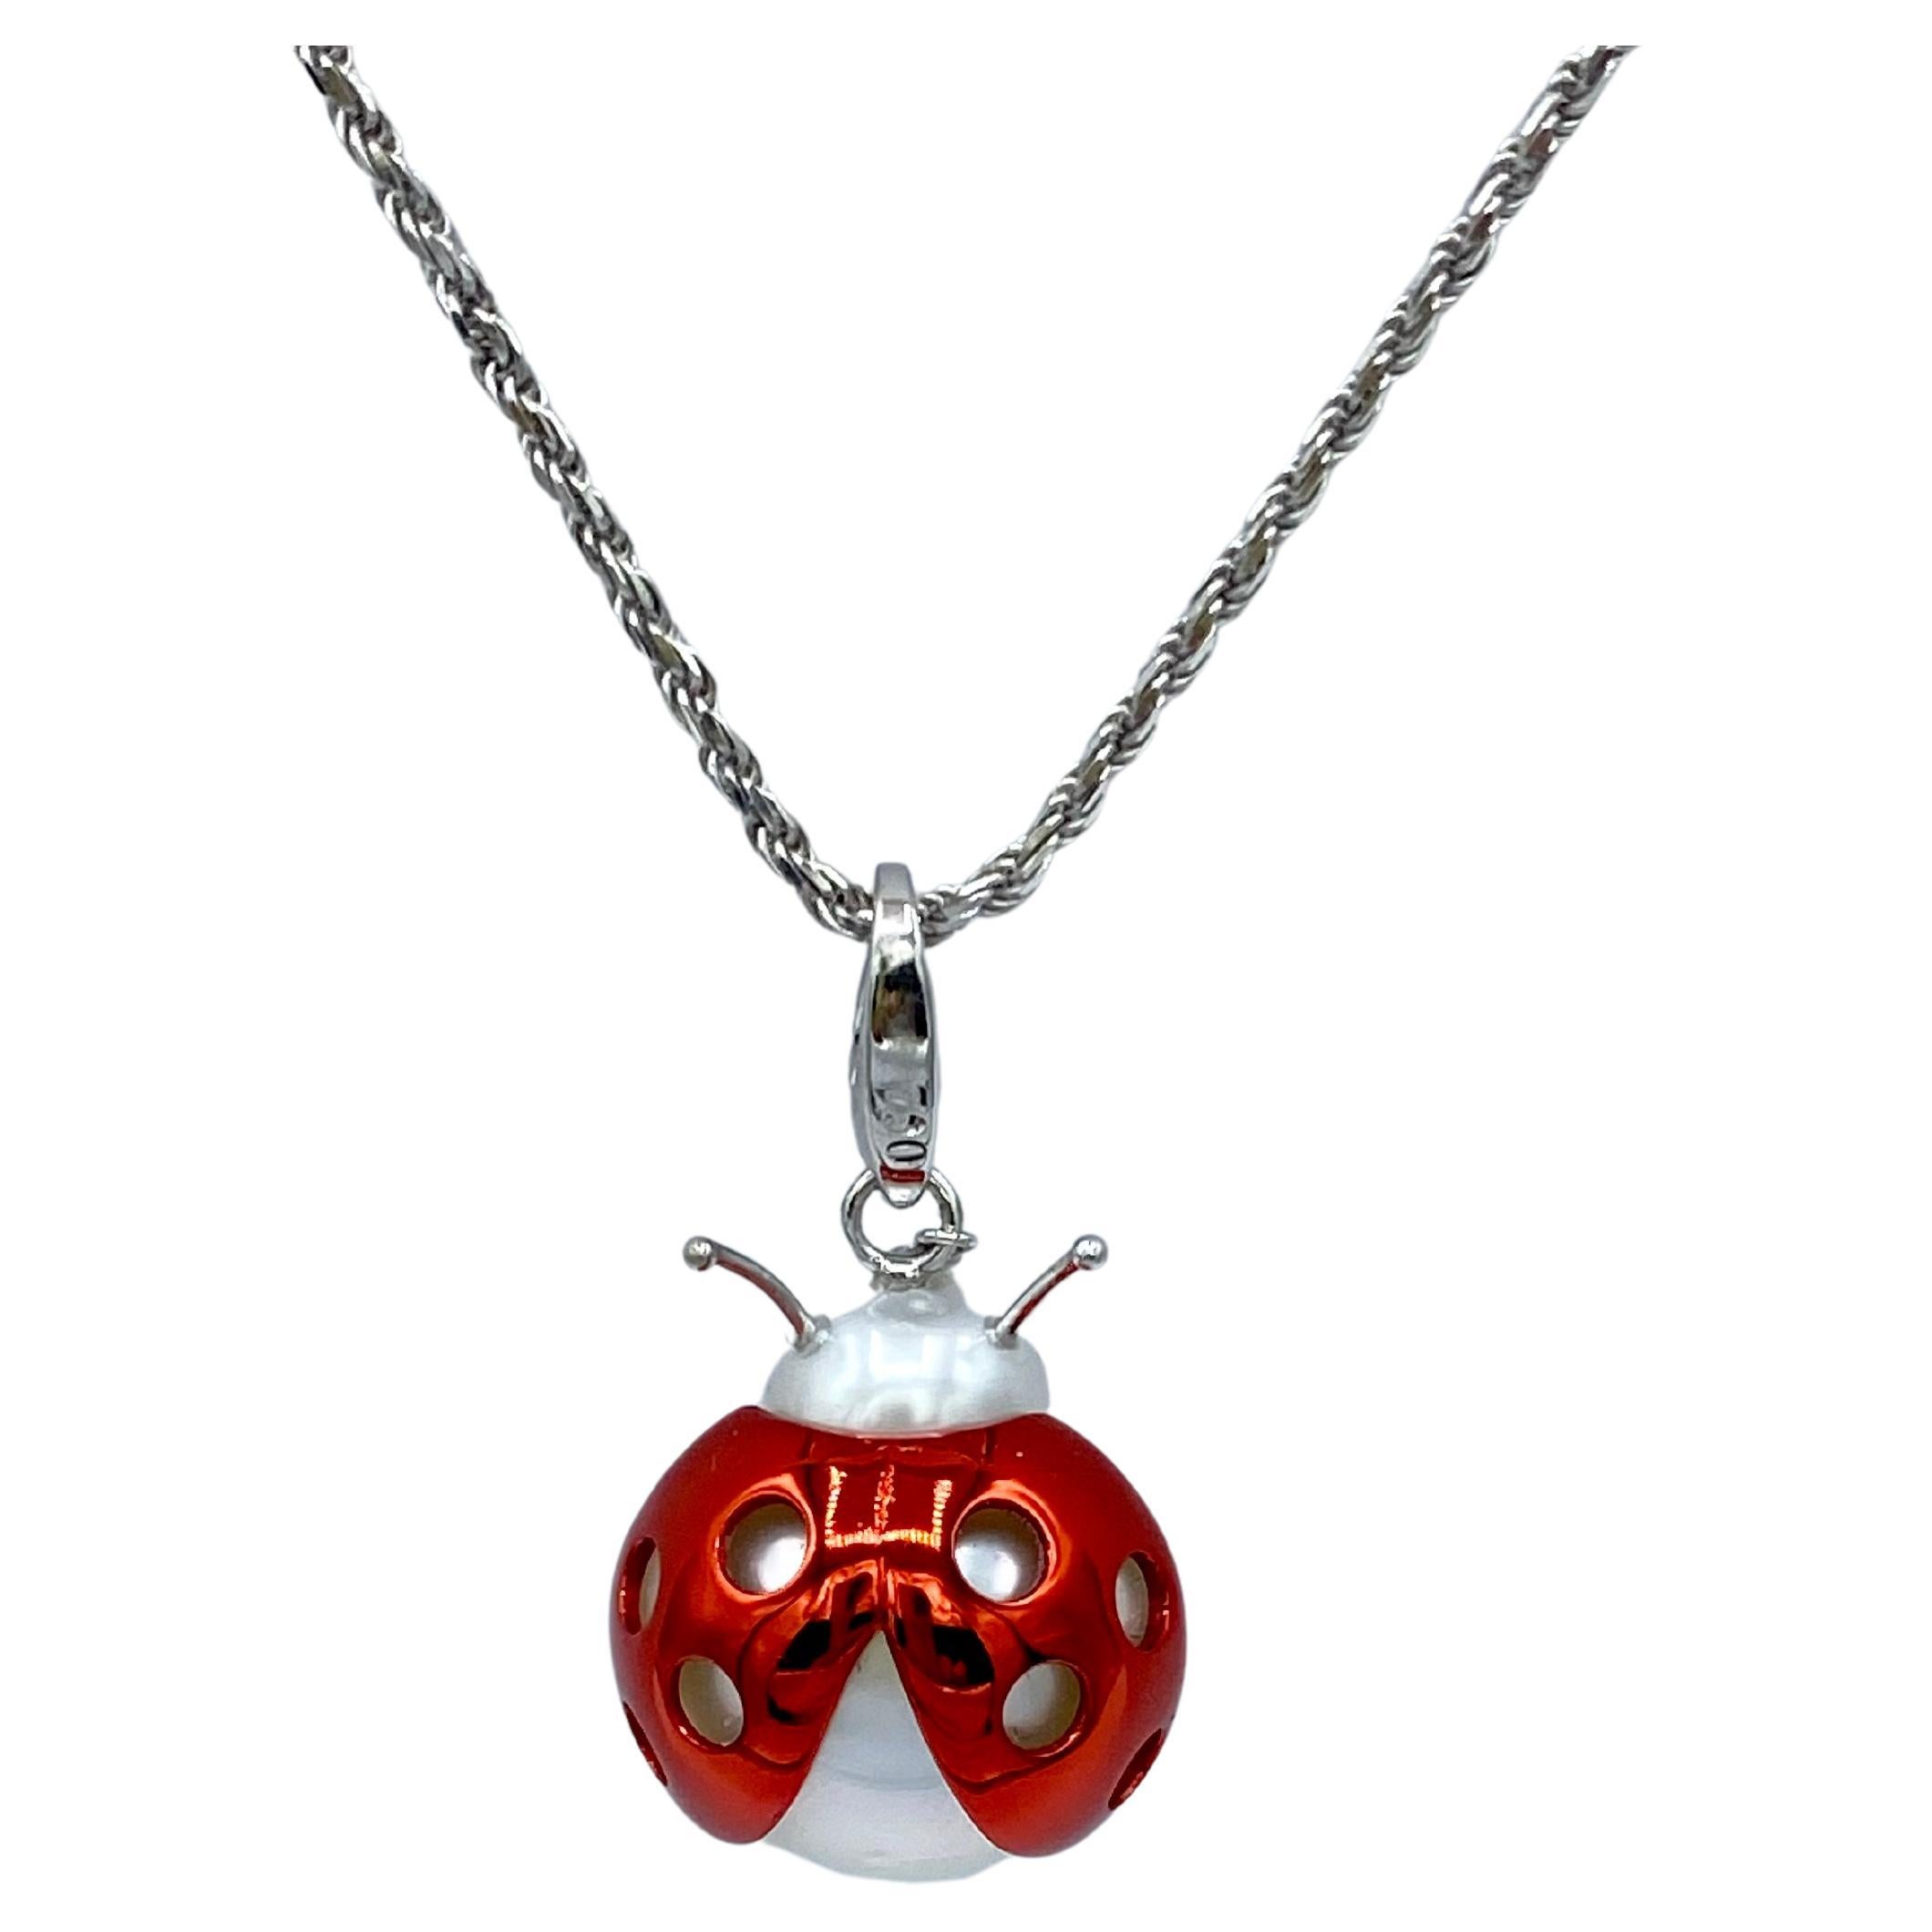 Ladybird/bug Australian Pearl Red White 18Kt Gold Pendant/Necklace or Charm
A very beautiful Australian pearl has been carefully crafted to make a ladybug, It is often used as a lucky charm. 
The ring for the necklace is a carabiner so it can be